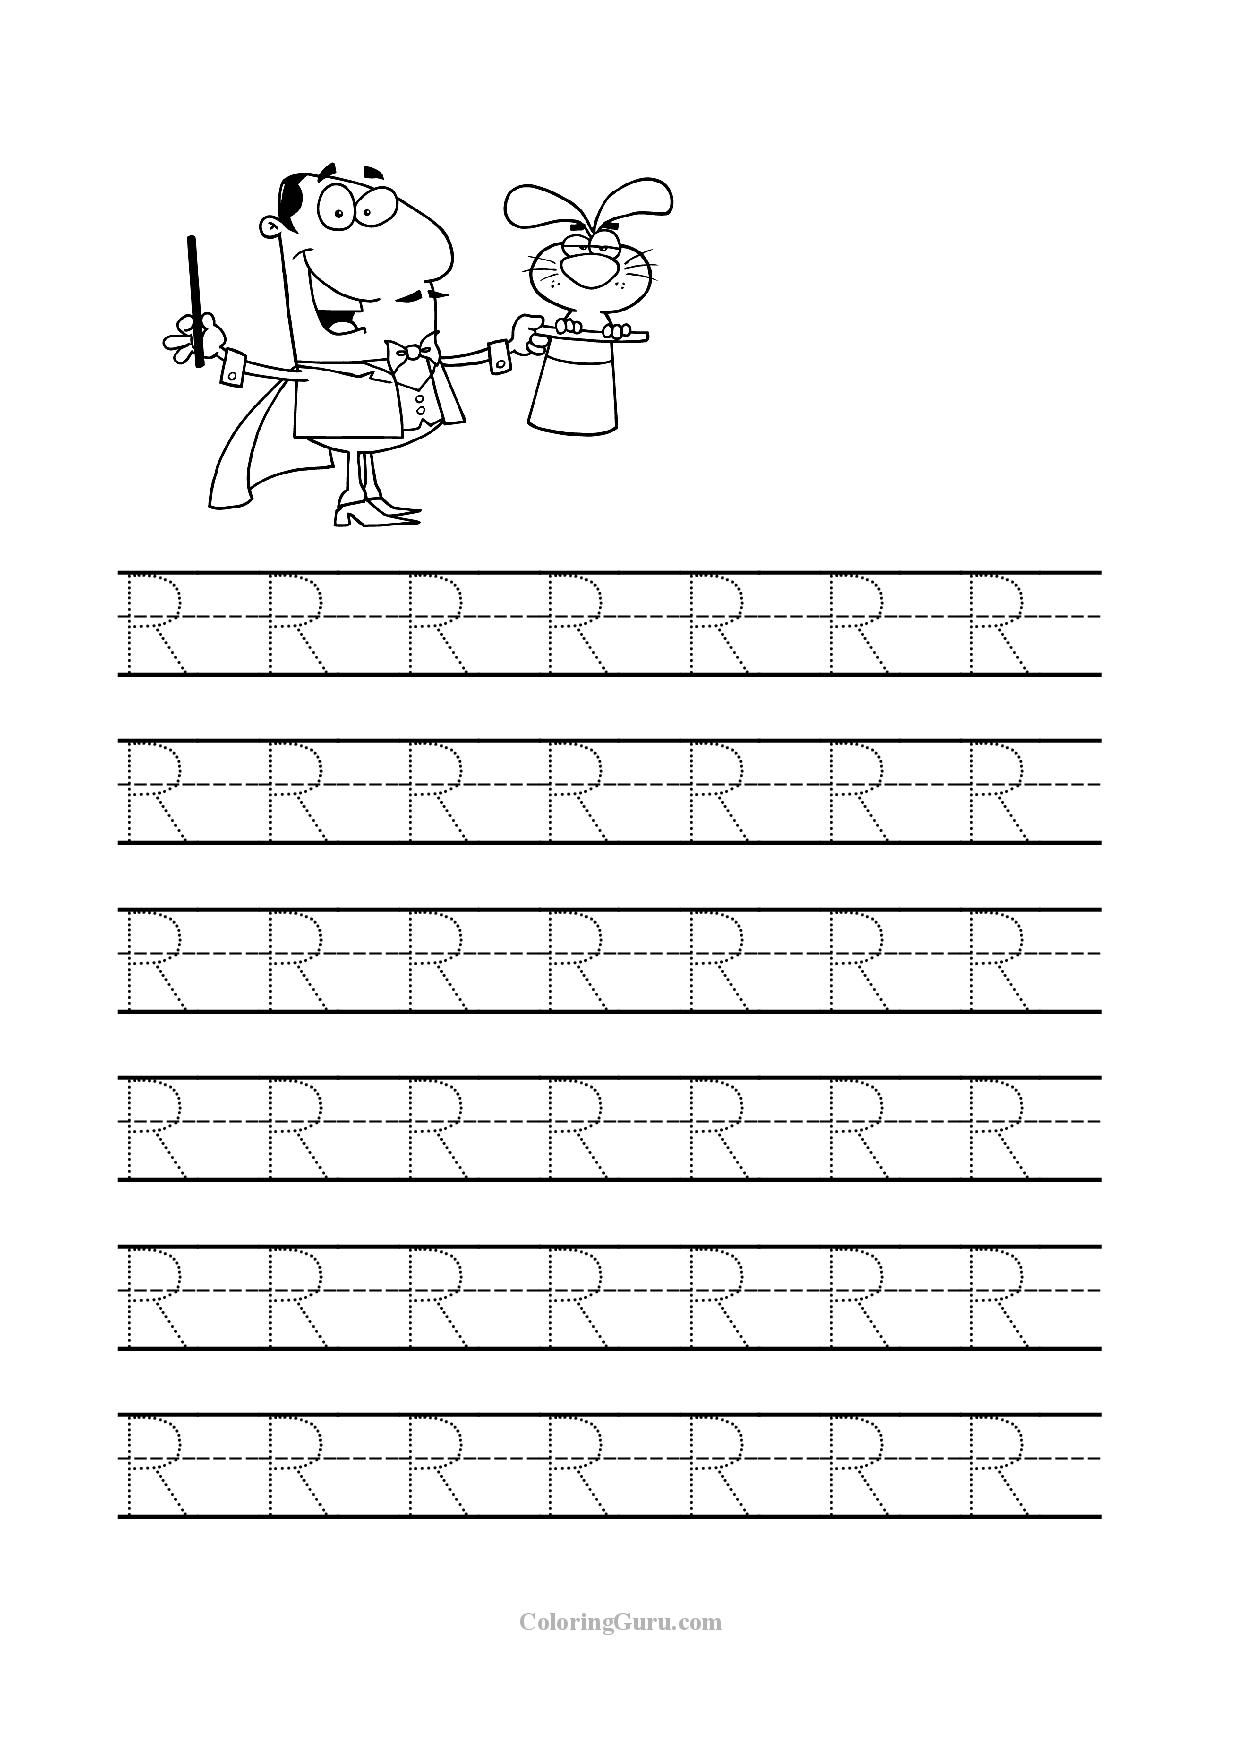 Free Printable Tracing Letter R Worksheets For Preschool inside Letter R Worksheets Preschool Free